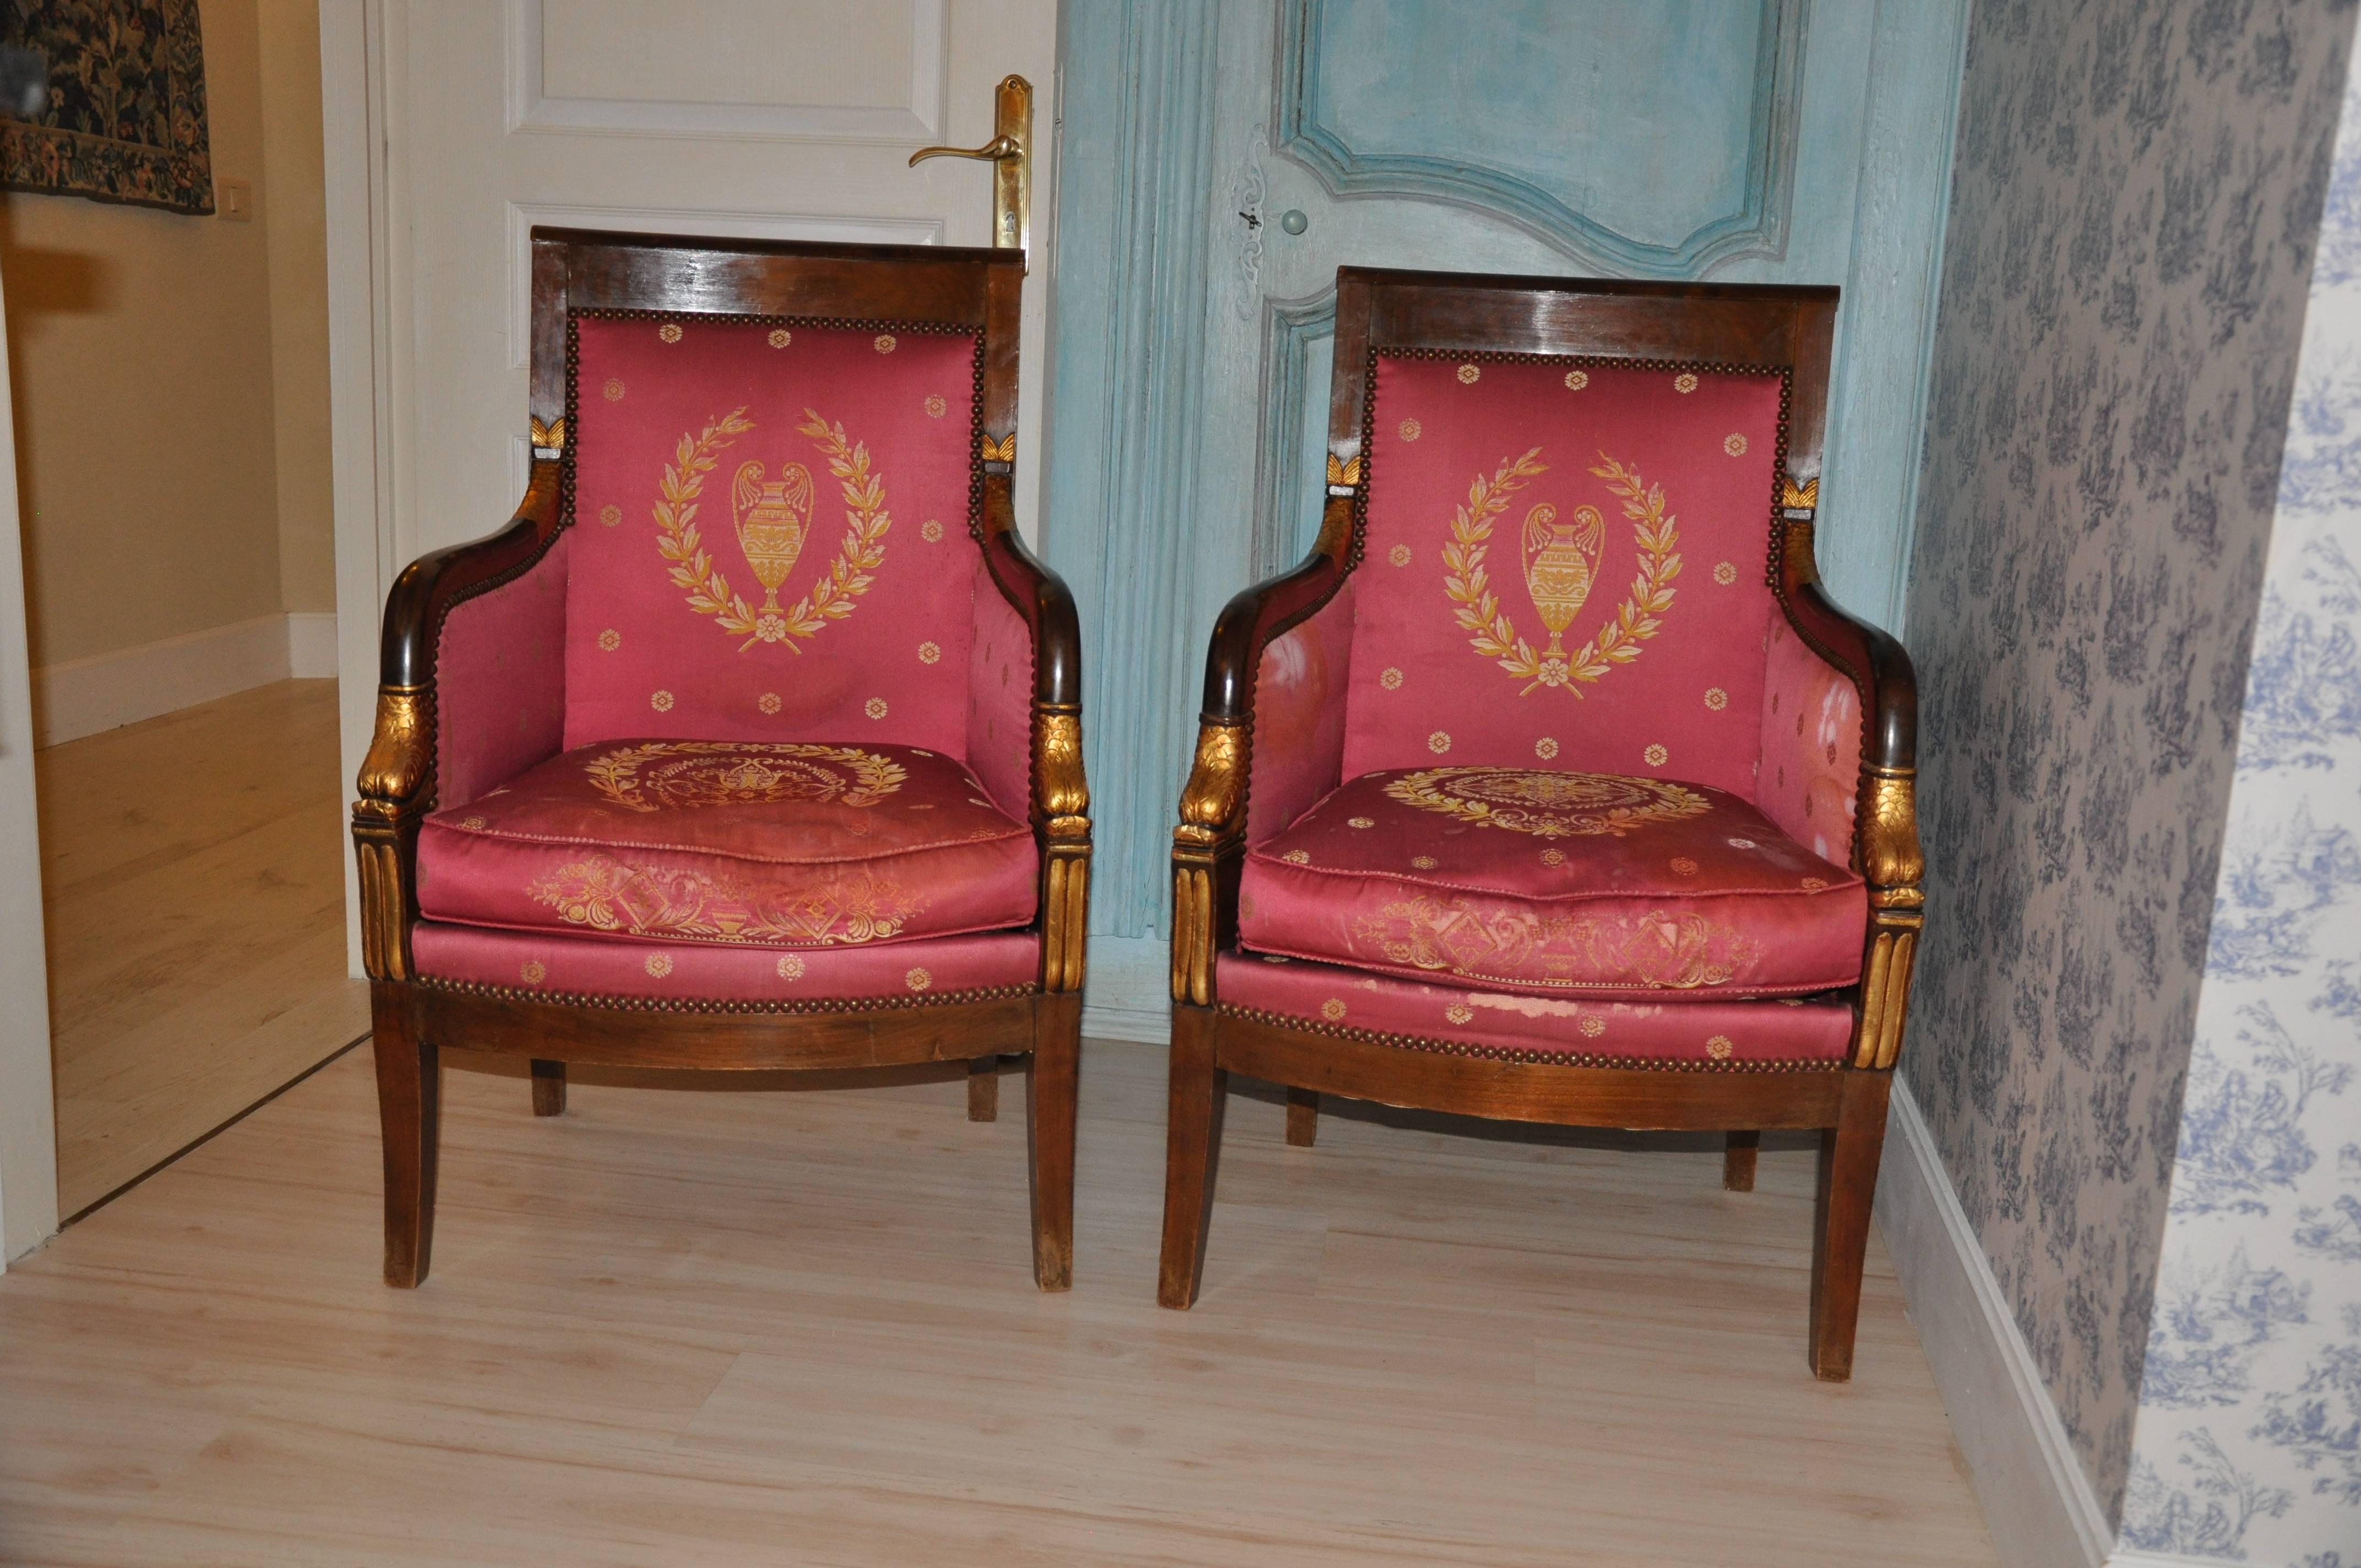 Rare pair of Italian Empire armchairs from Lucca. The period is around the beginning of the 19th century (1800). The armchairs are ornamented with gold-plated leaf pieces. They are to be restored.